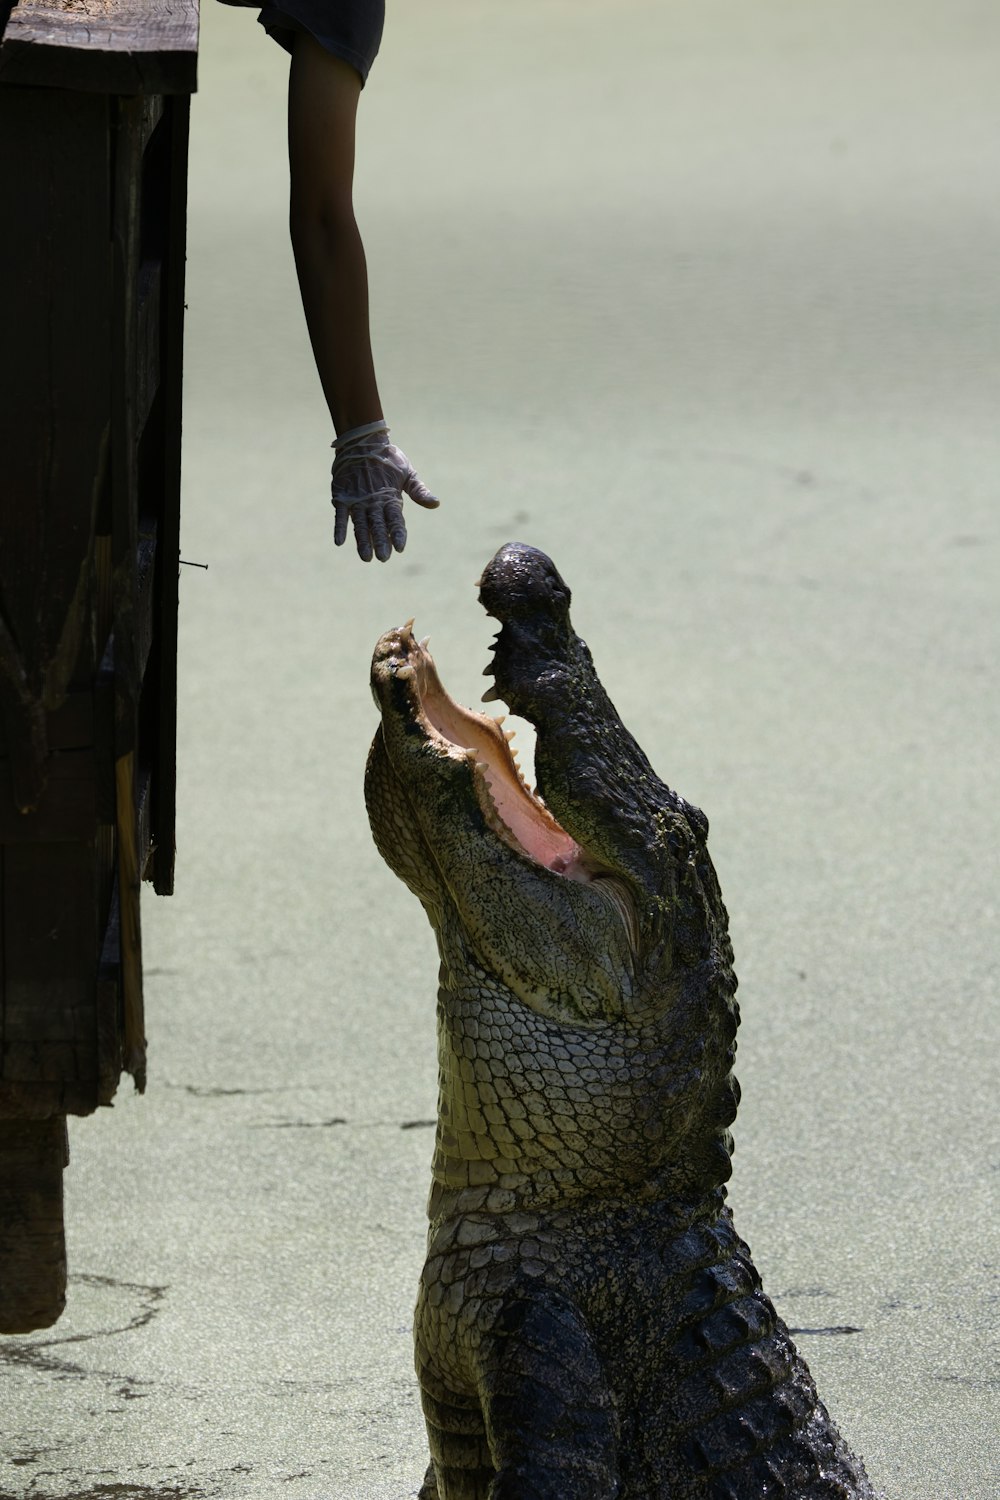 a person reaching out to a large alligator